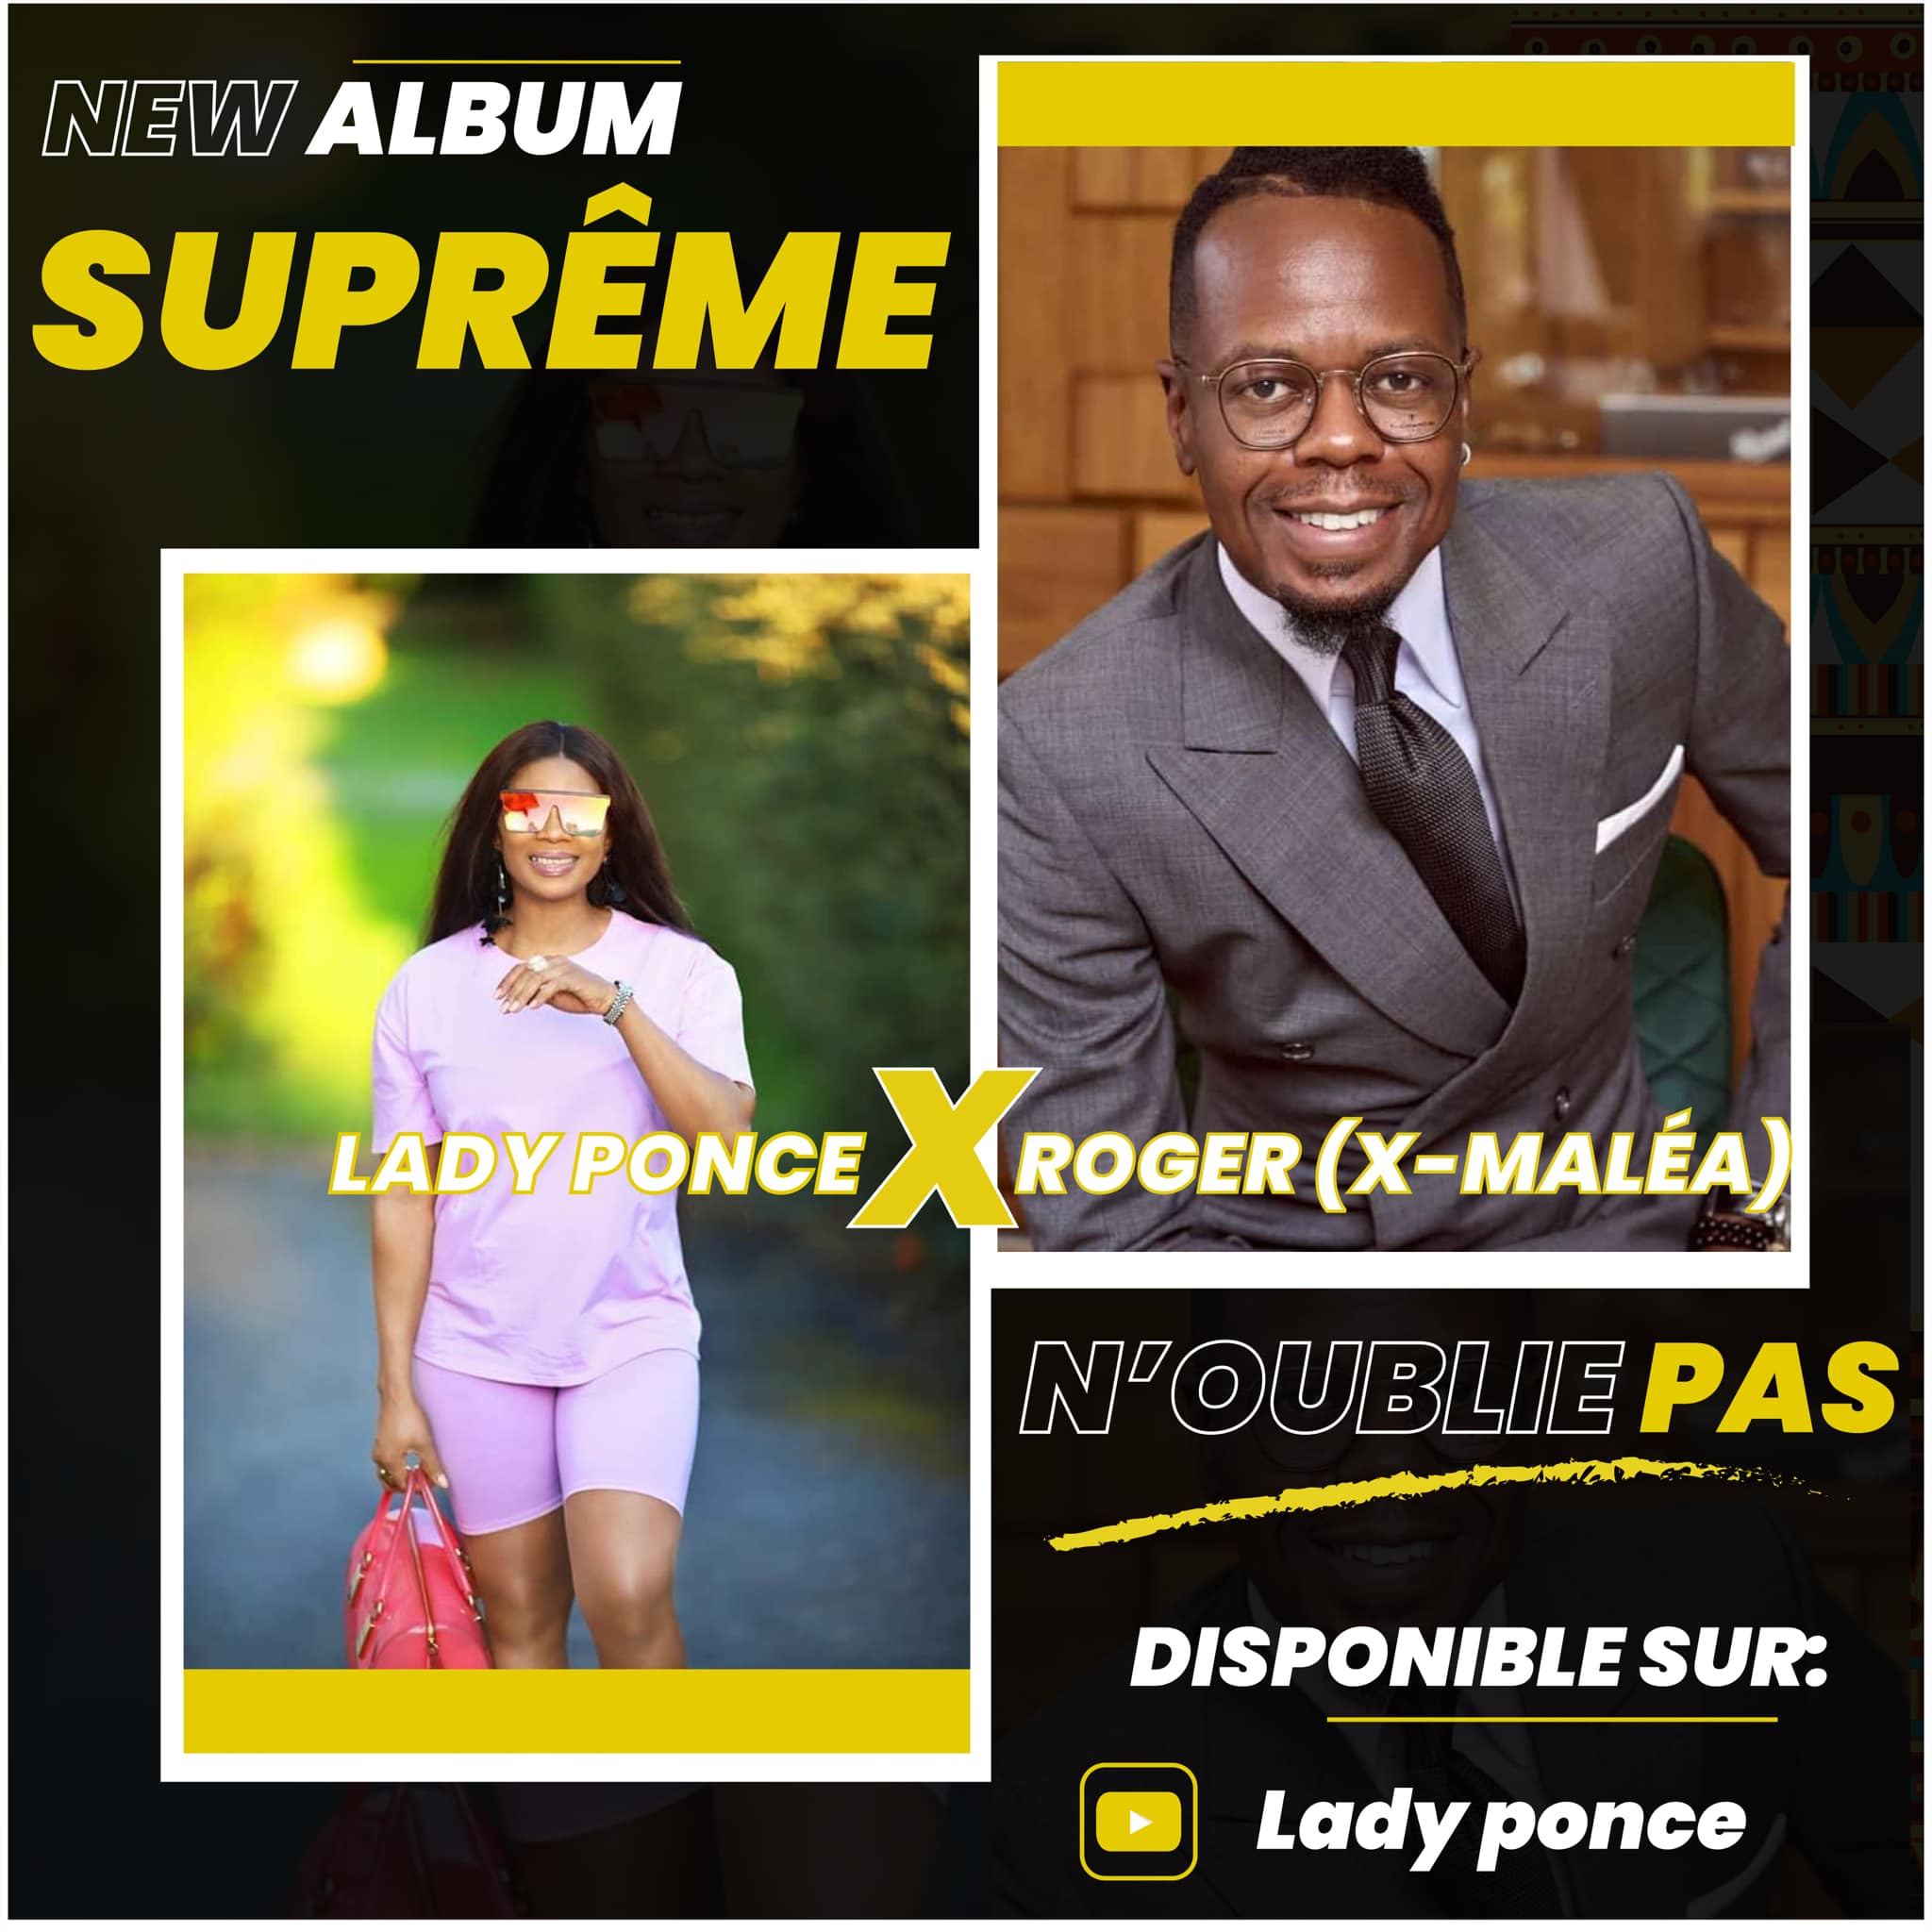 "N'Oublie Pas" - Lady Ponce x Roger(X-Maleya)